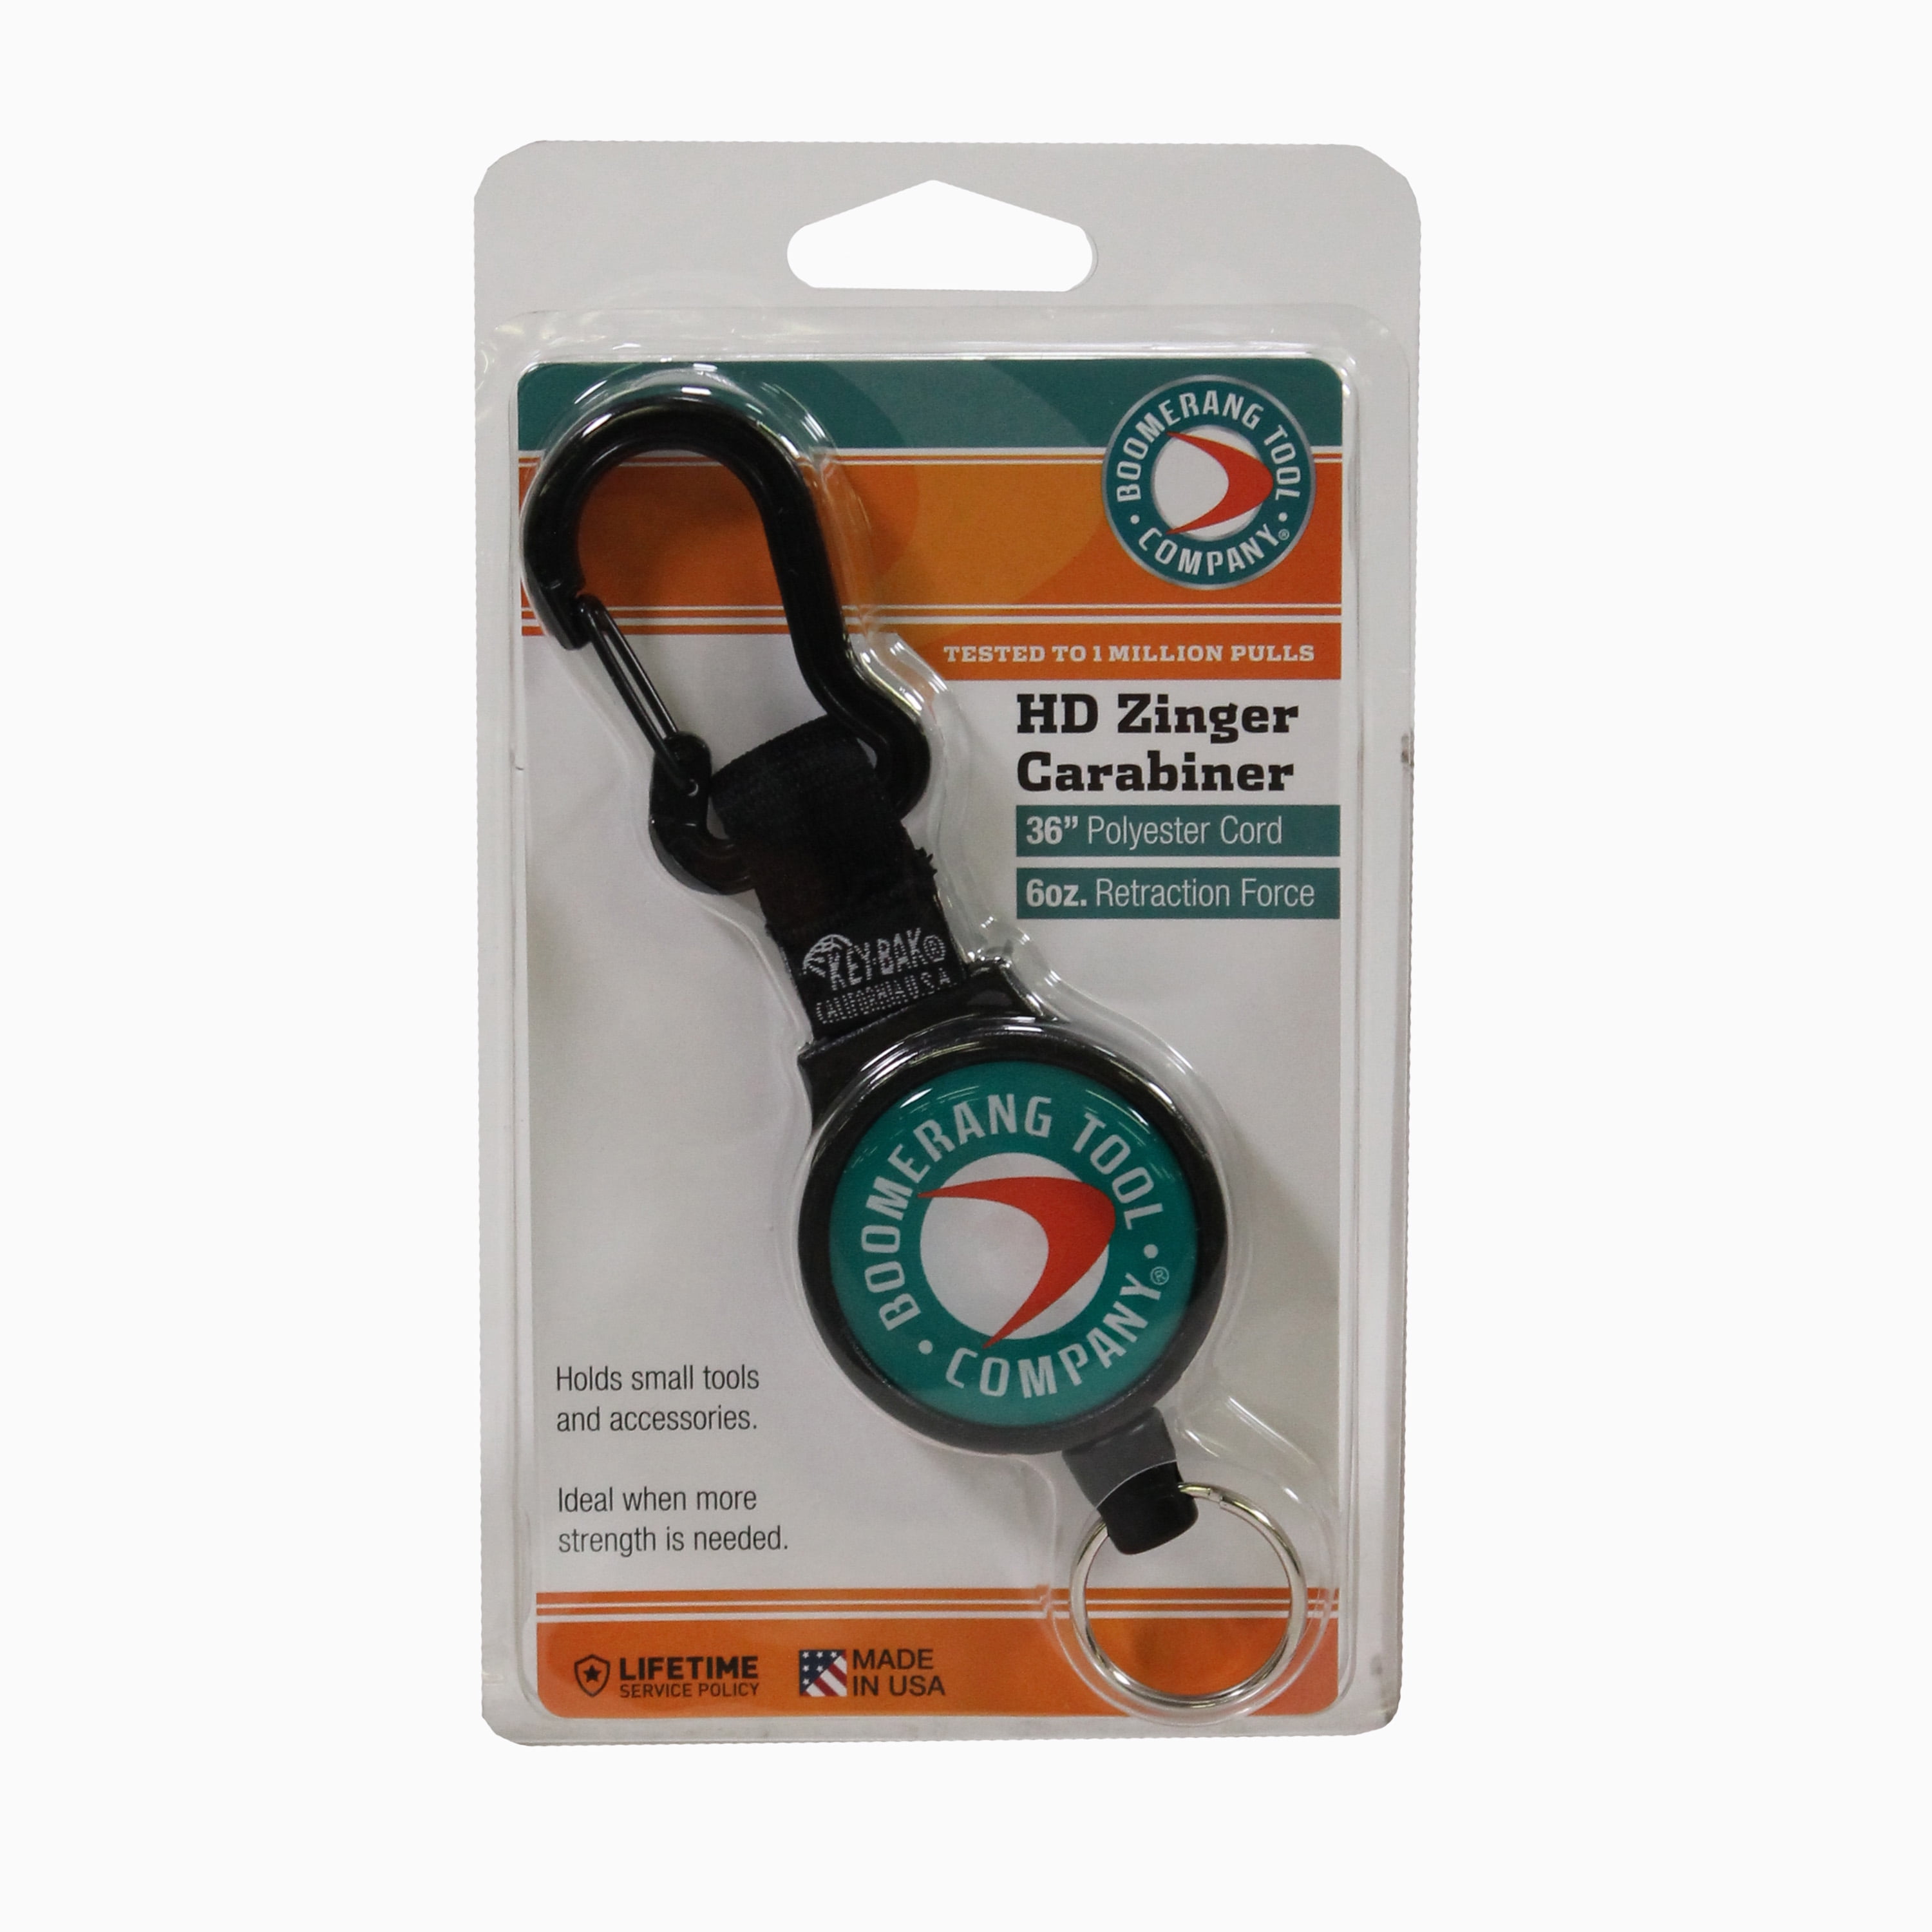 Heavy Duty Carabiner Zinger with 36 Retractable Kevlar Cord and